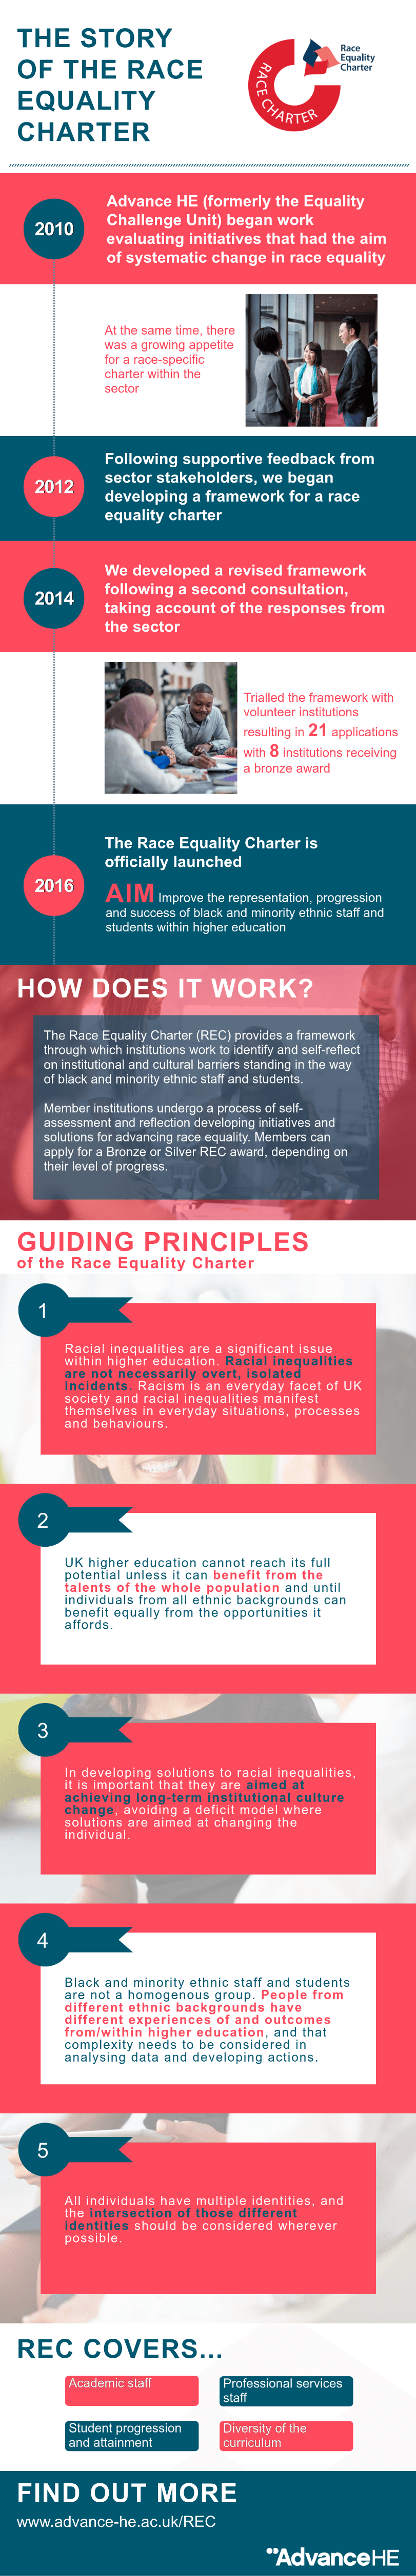 Infographic - Race Equality Charter (REC)